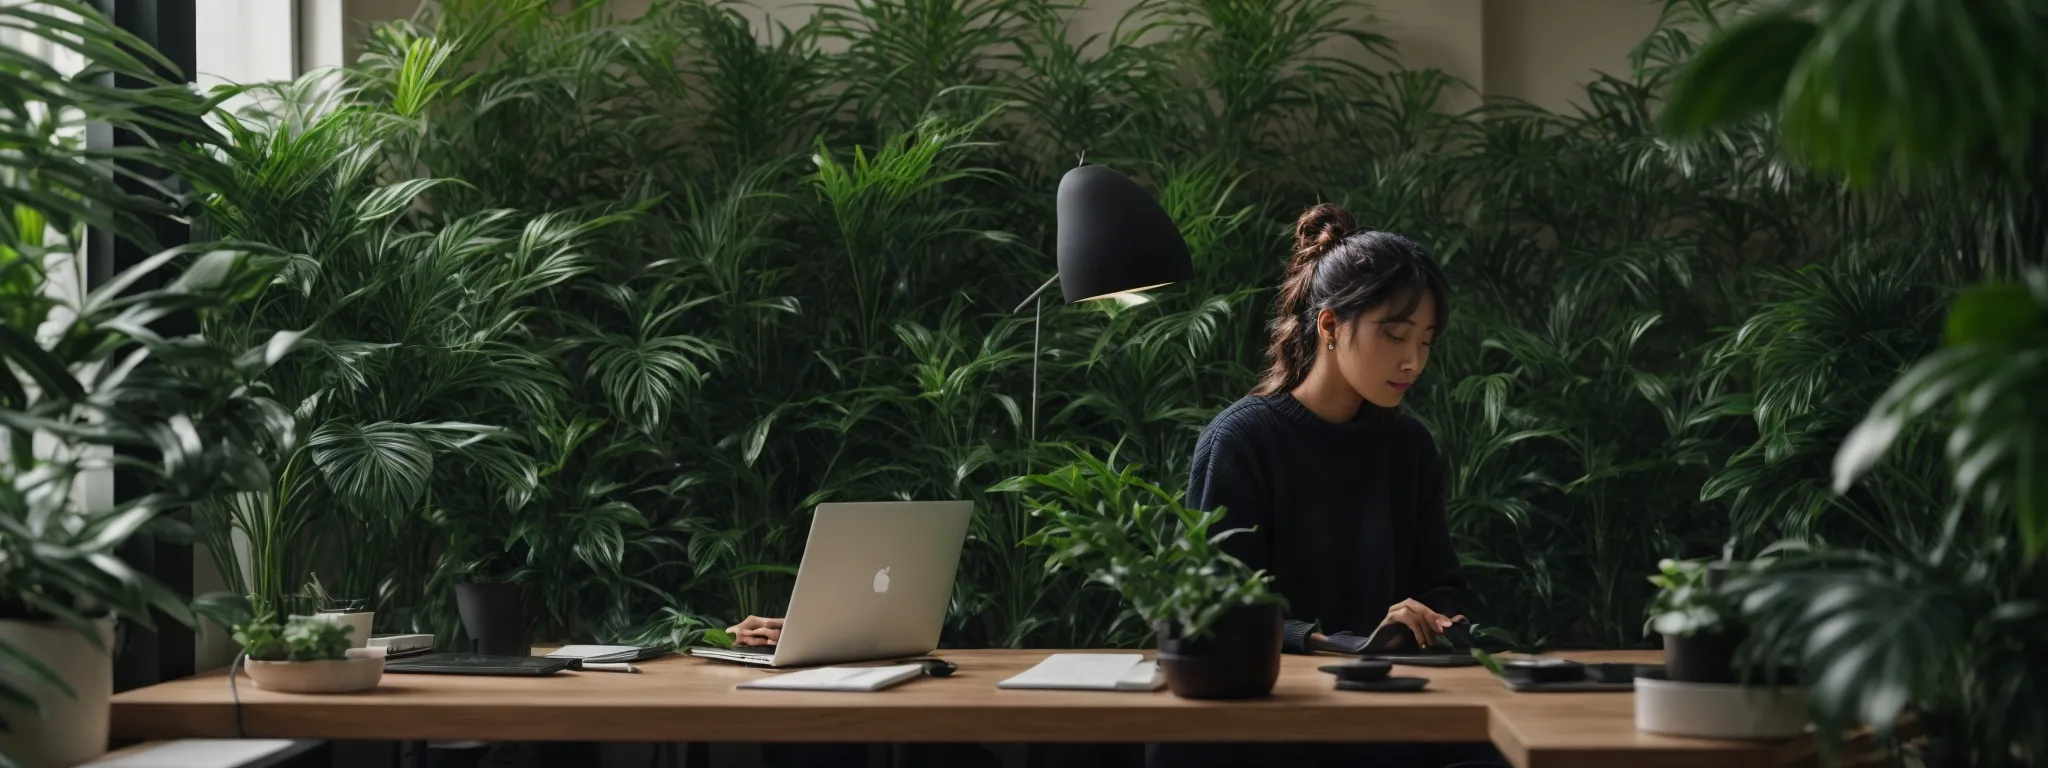 a panoramic view of an individual typing on a laptop in a minimalist workspace, surrounded by lush indoor plants, symbolizing focused content creation for seo.